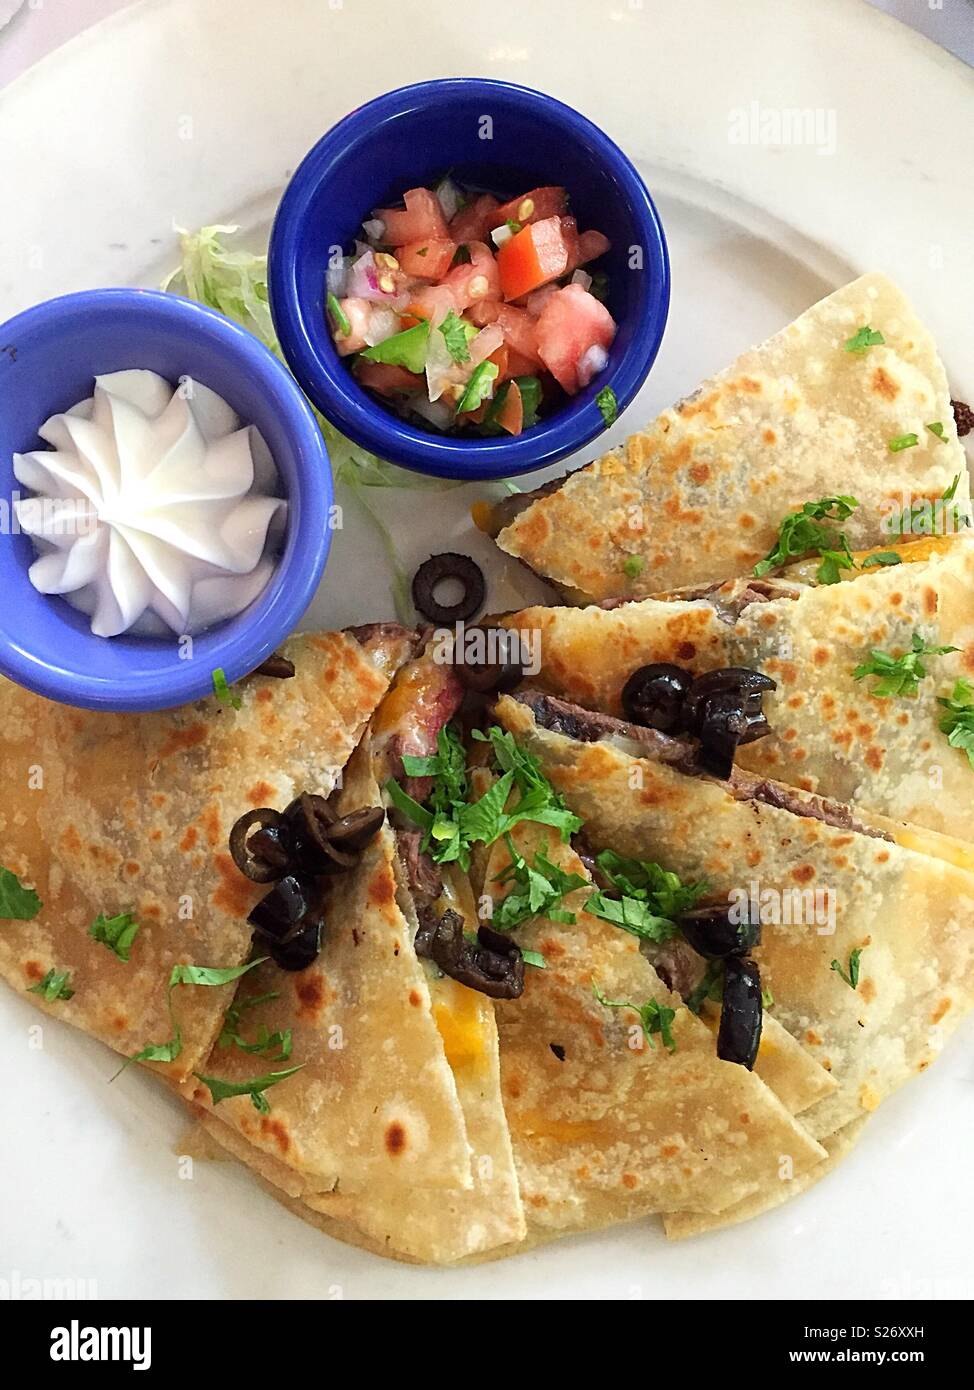 Entrée in an upscale Mexican restaurant of quesadilla and assorted toppings, New York City, USA Stock Photo